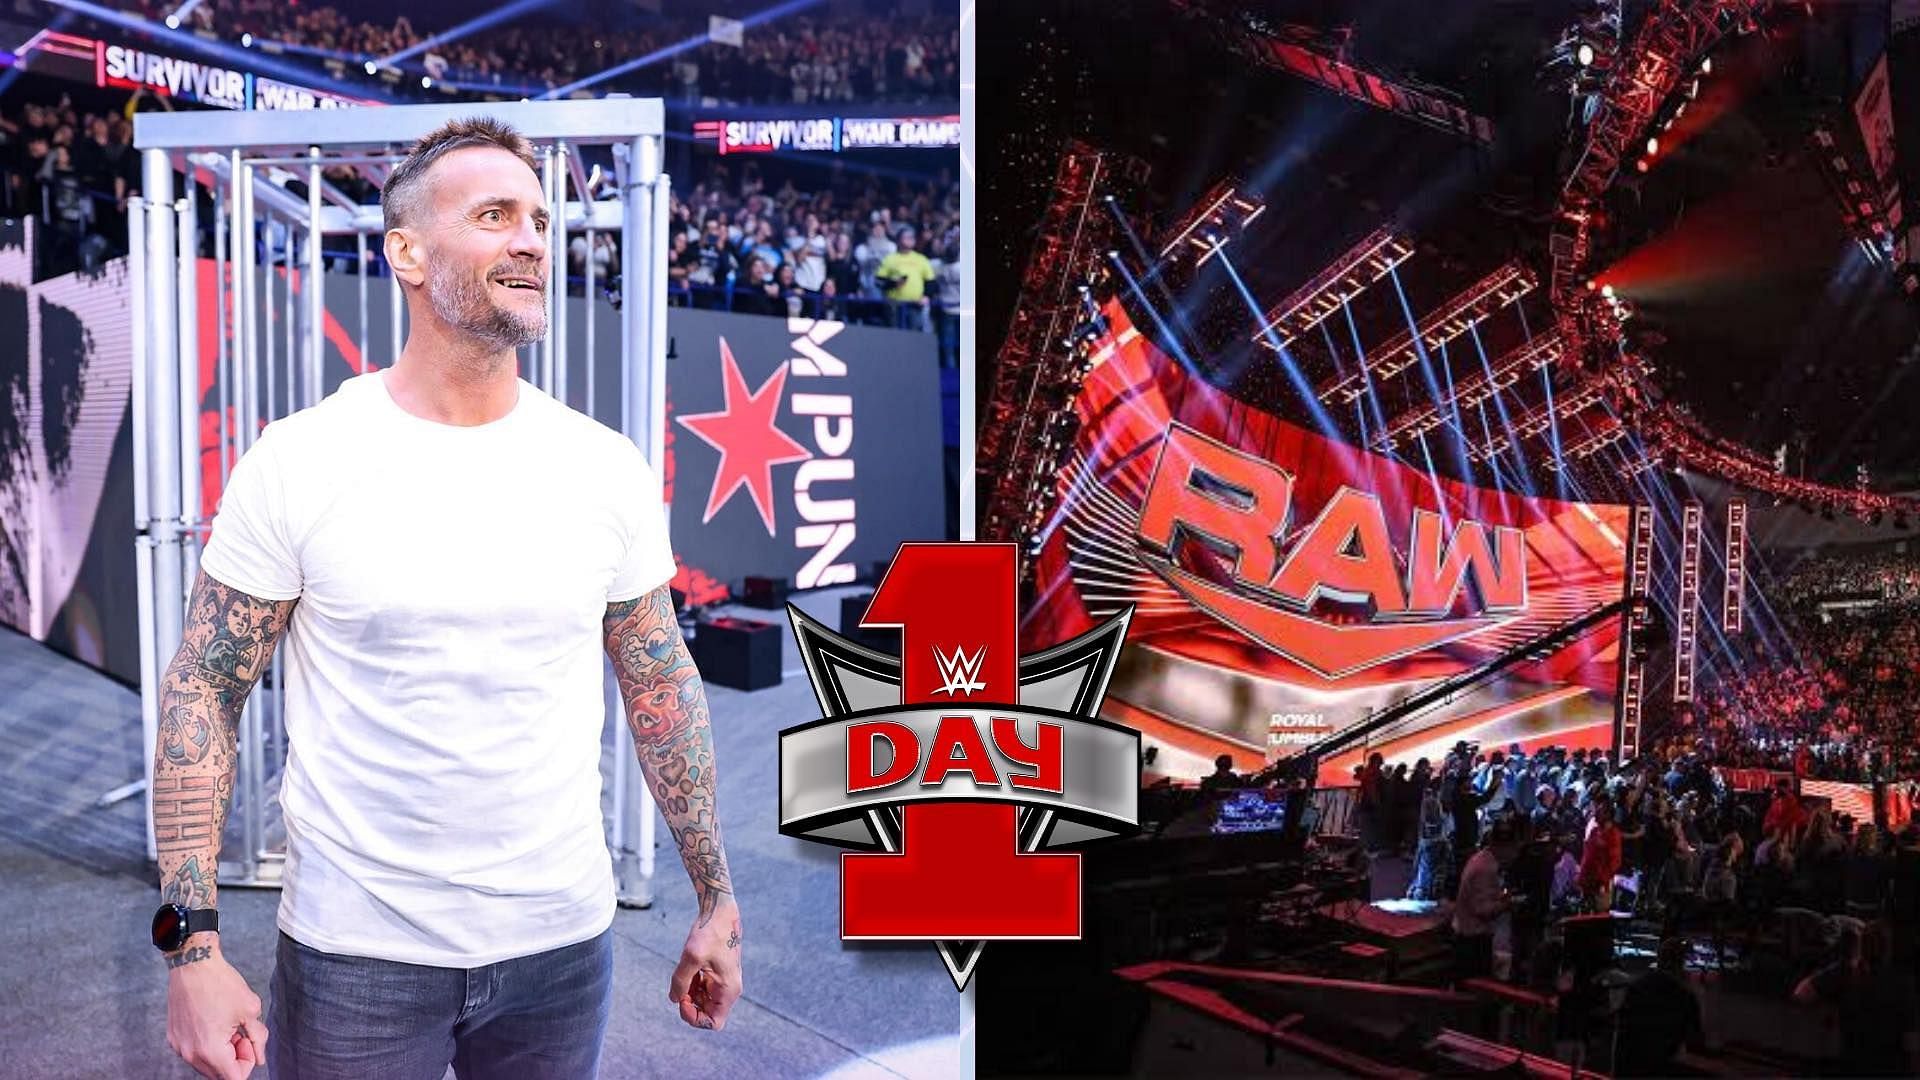 WWE RAW this week was live from the Pechanga Arena in San Diego, California